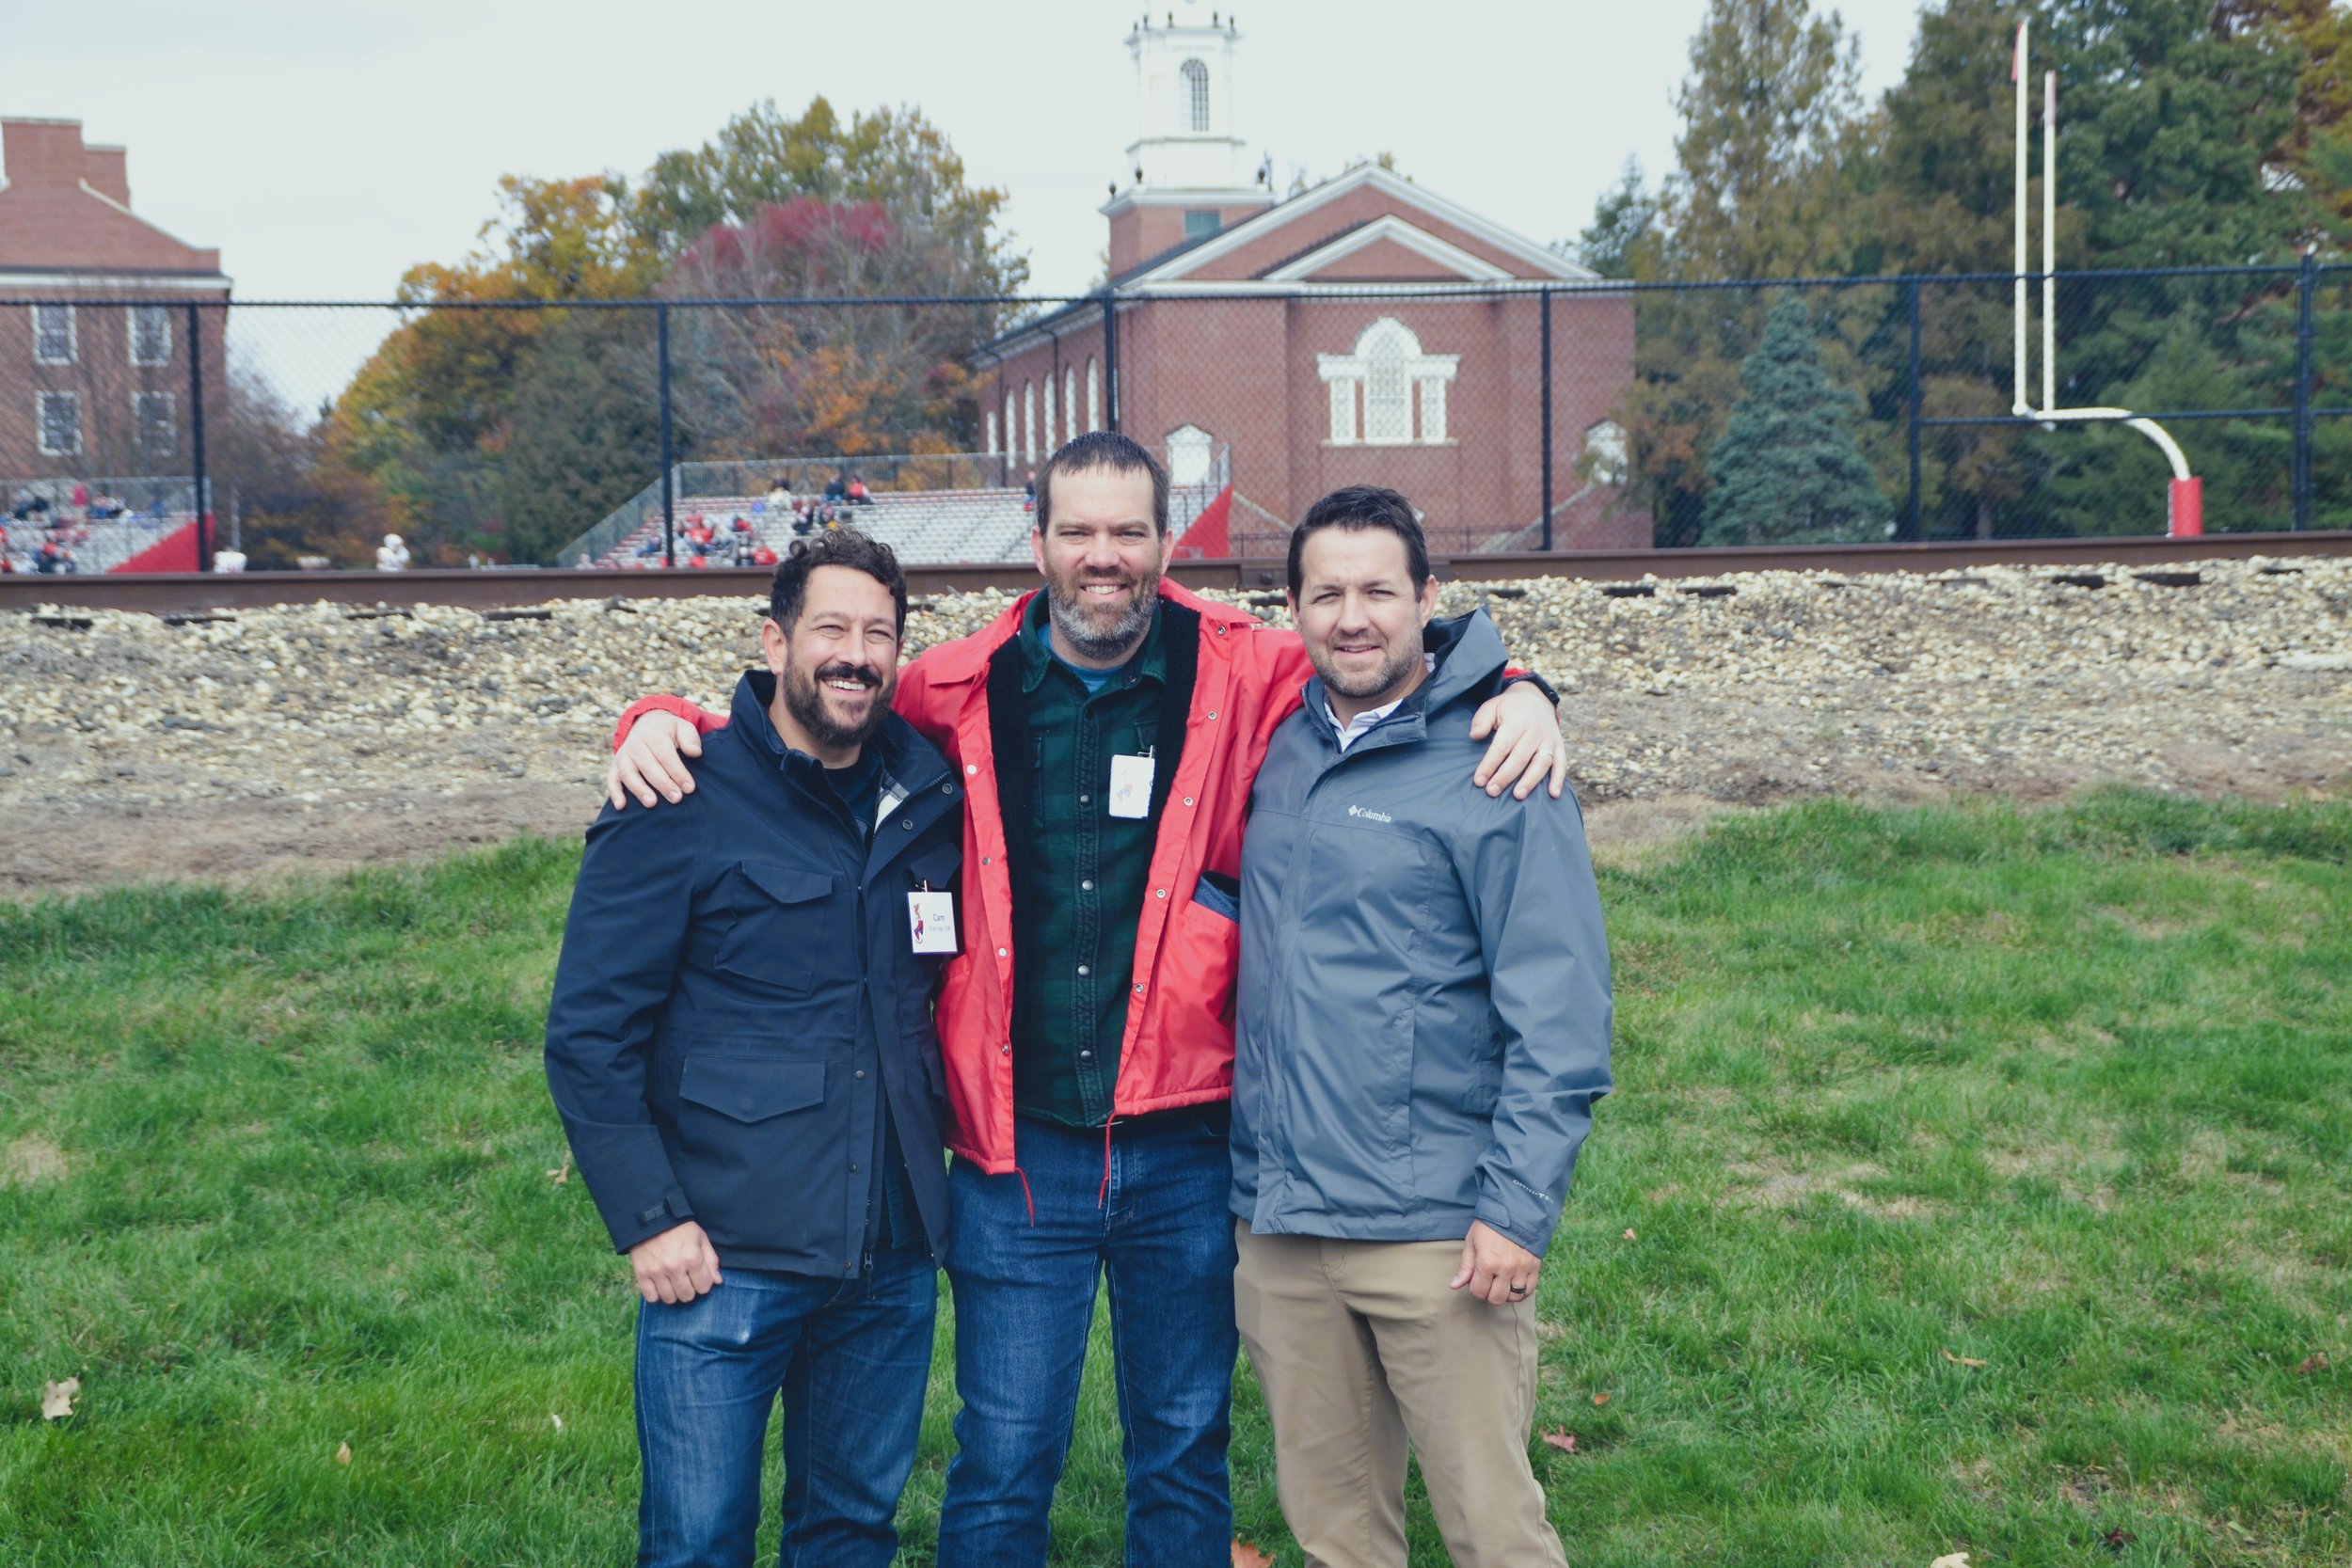  Cameron Starnes '04, Caleb Selby '04, and Bubba Stultz '04 take a group photo just outside the tailgate tent. 